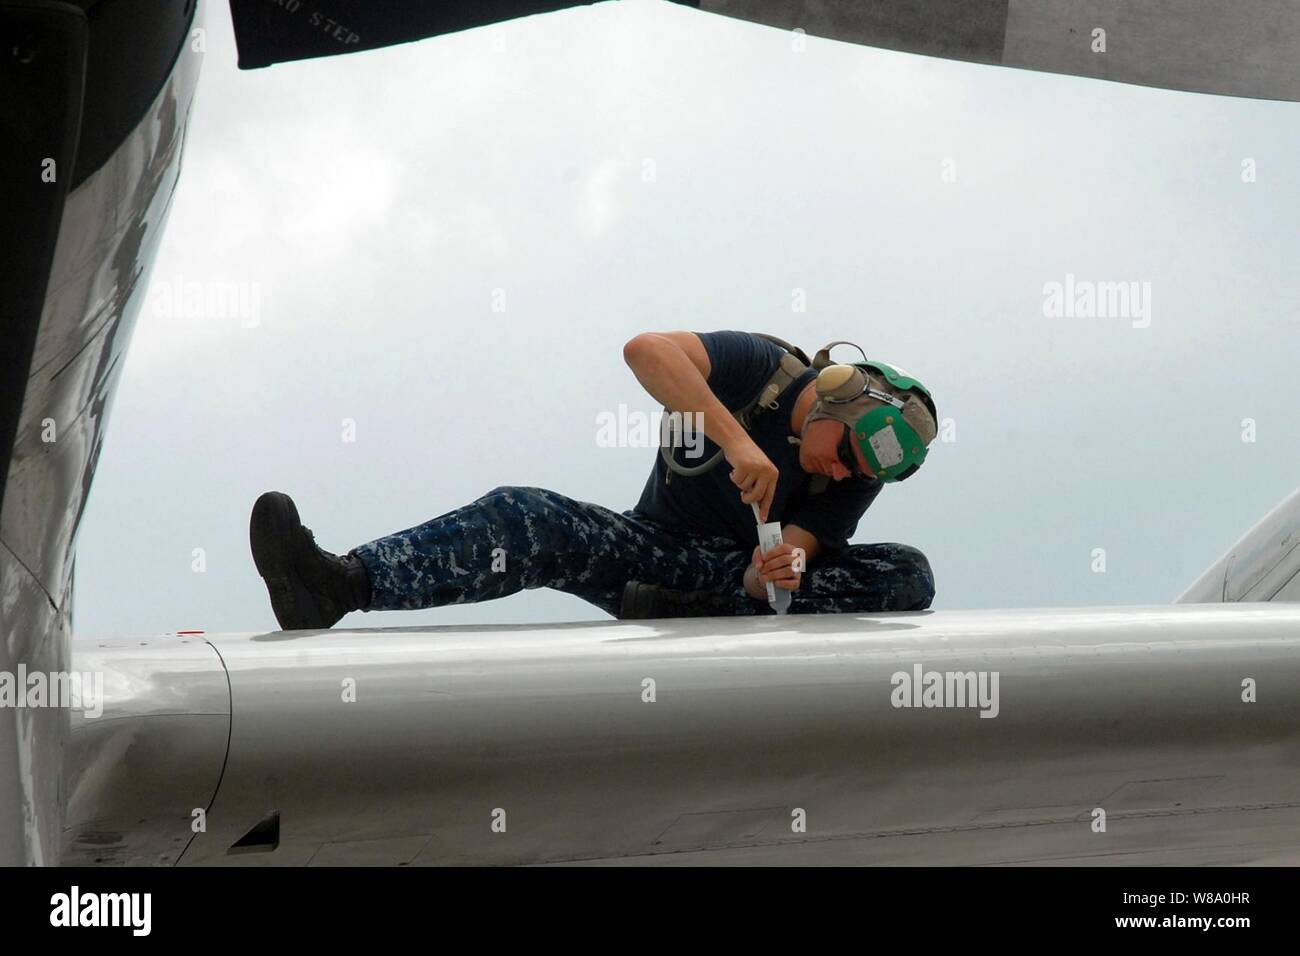 U.S. Navy Petty Officer 2nd Class Ruel Beck applies sealant to a leading edge wing panel of a P-3C Orion on Kadena Air Base in Okinawa, Japan, on Sept. 6, 2011.  Beck is an Aviation Structural Mechanic assigned to Patrol Squadron 40. Stock Photo